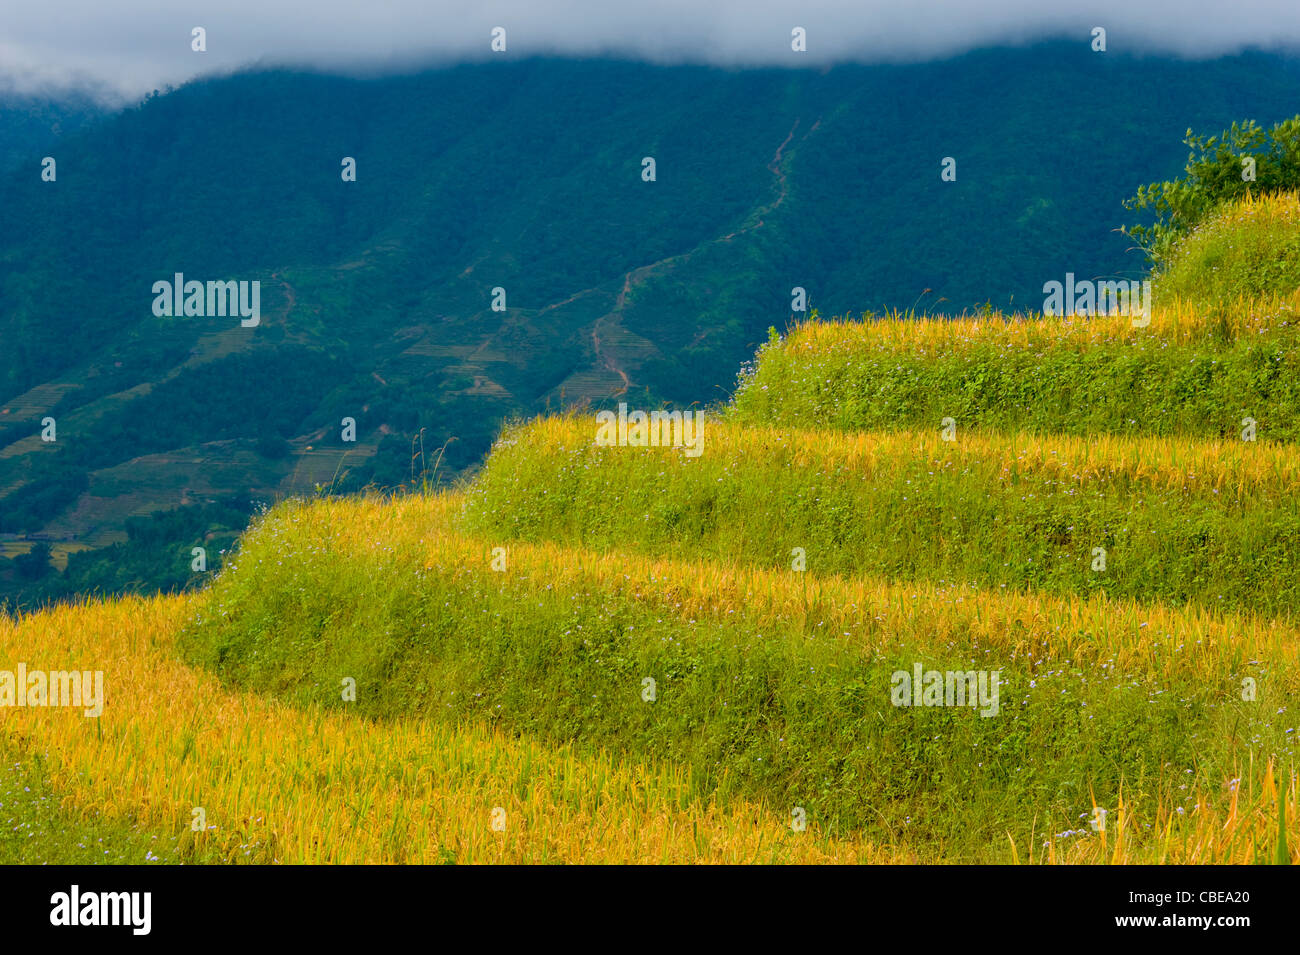 rice fields with mountains in the background, top of the mountains is covered in clouds, north Vietnam Stock Photo